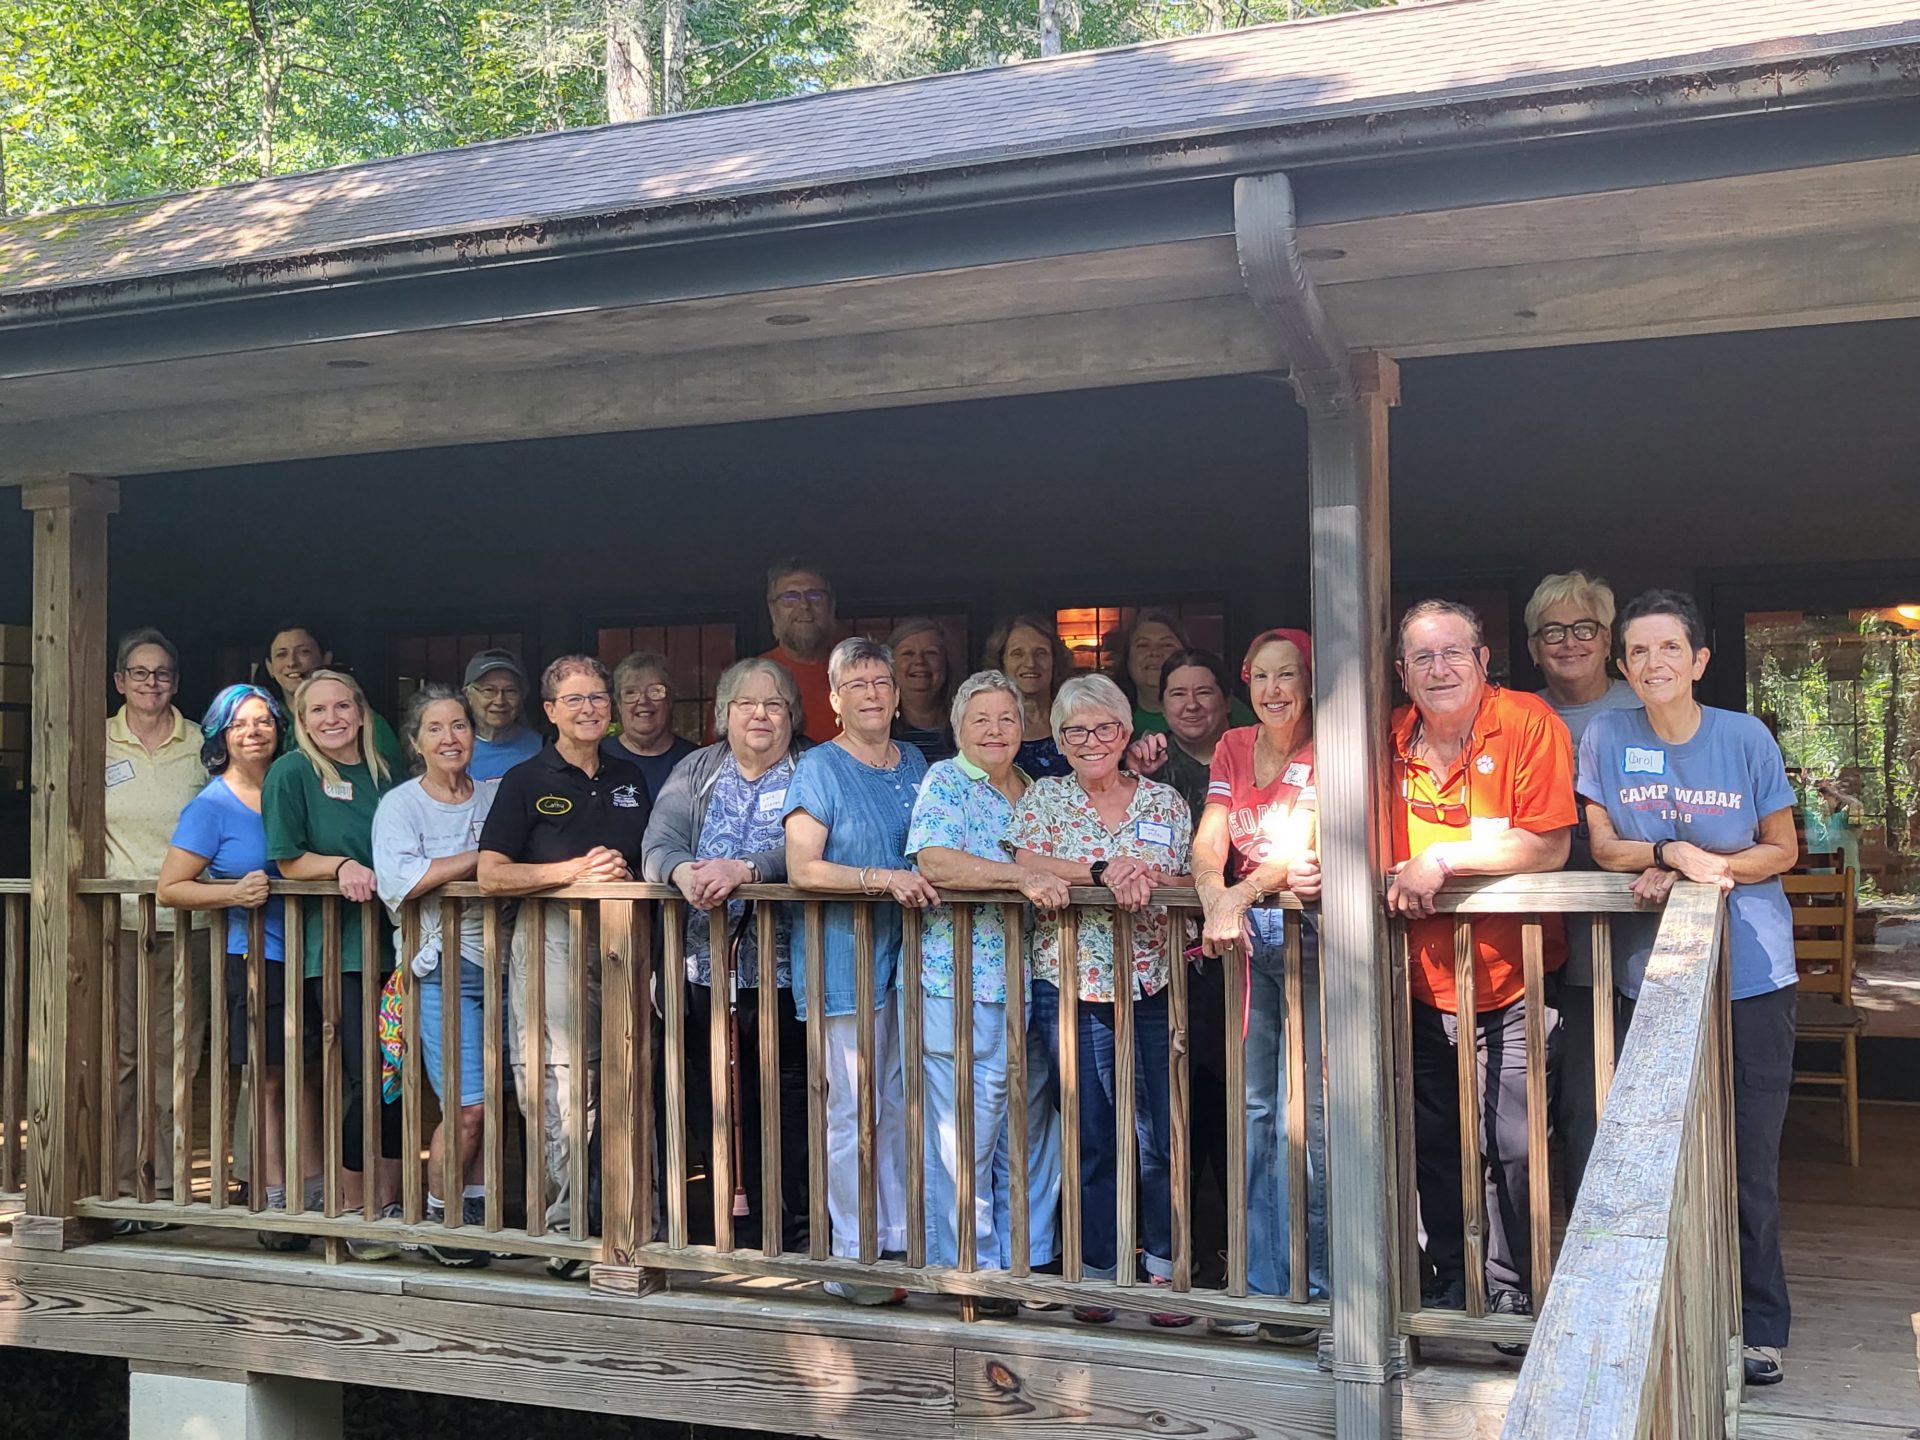  Members of Friends of Camp WaBak gather together and pose on a porch at Camp WaBak. 